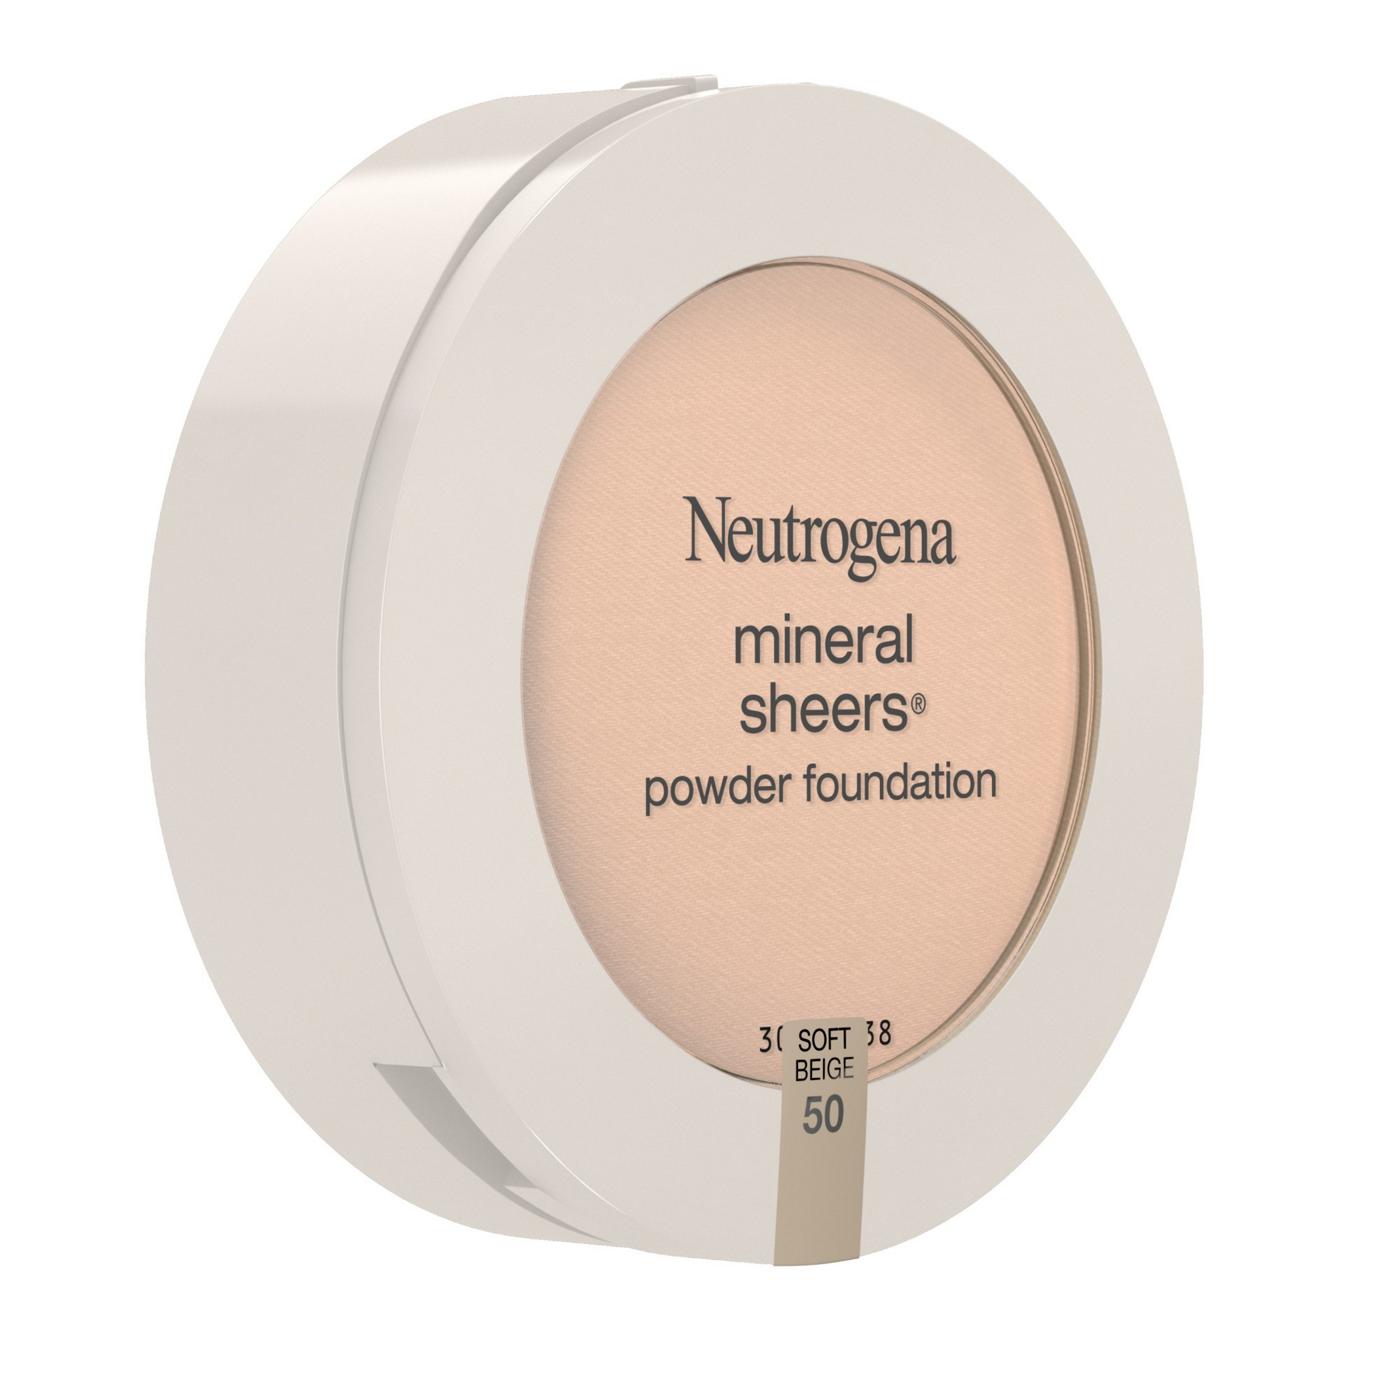 Neutrogena Mineral Sheers Compact Powder Foundation 50 Soft Beige; image 6 of 6